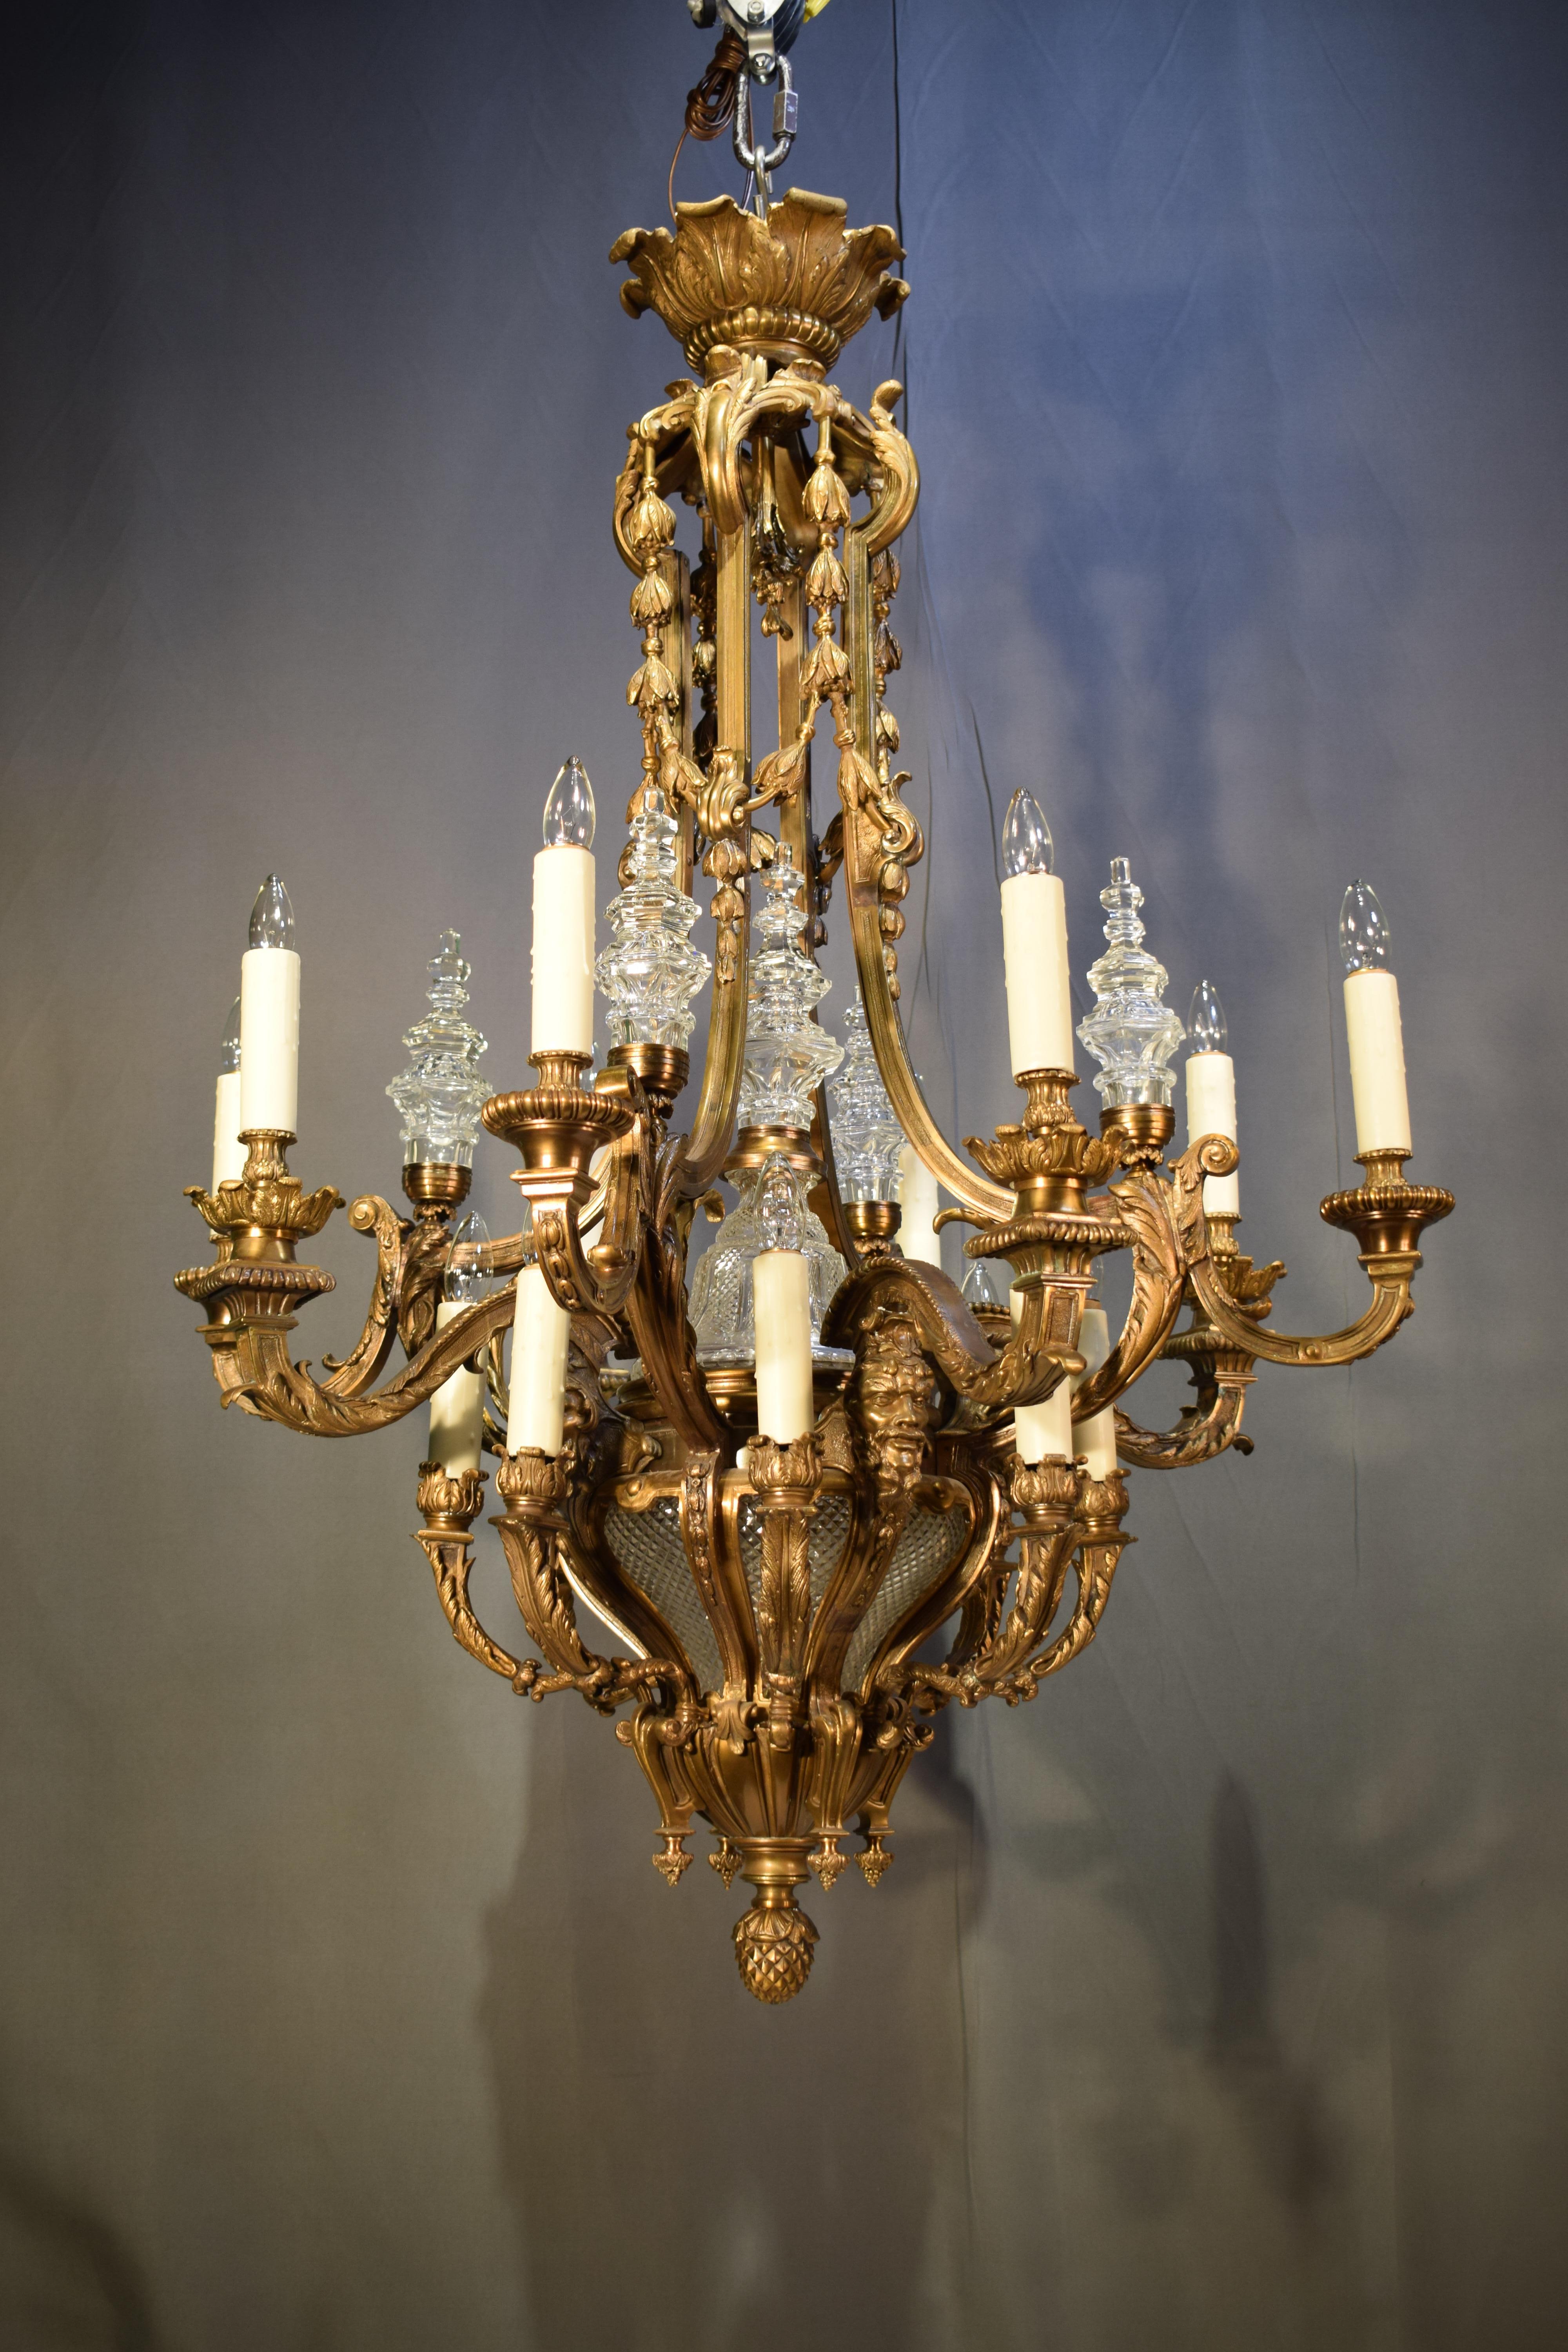 A magnificent gilt bronze and crystal chandelier in the Louis XIV style. 17 Lights. France, circa 1930. Dimensions: Height 55